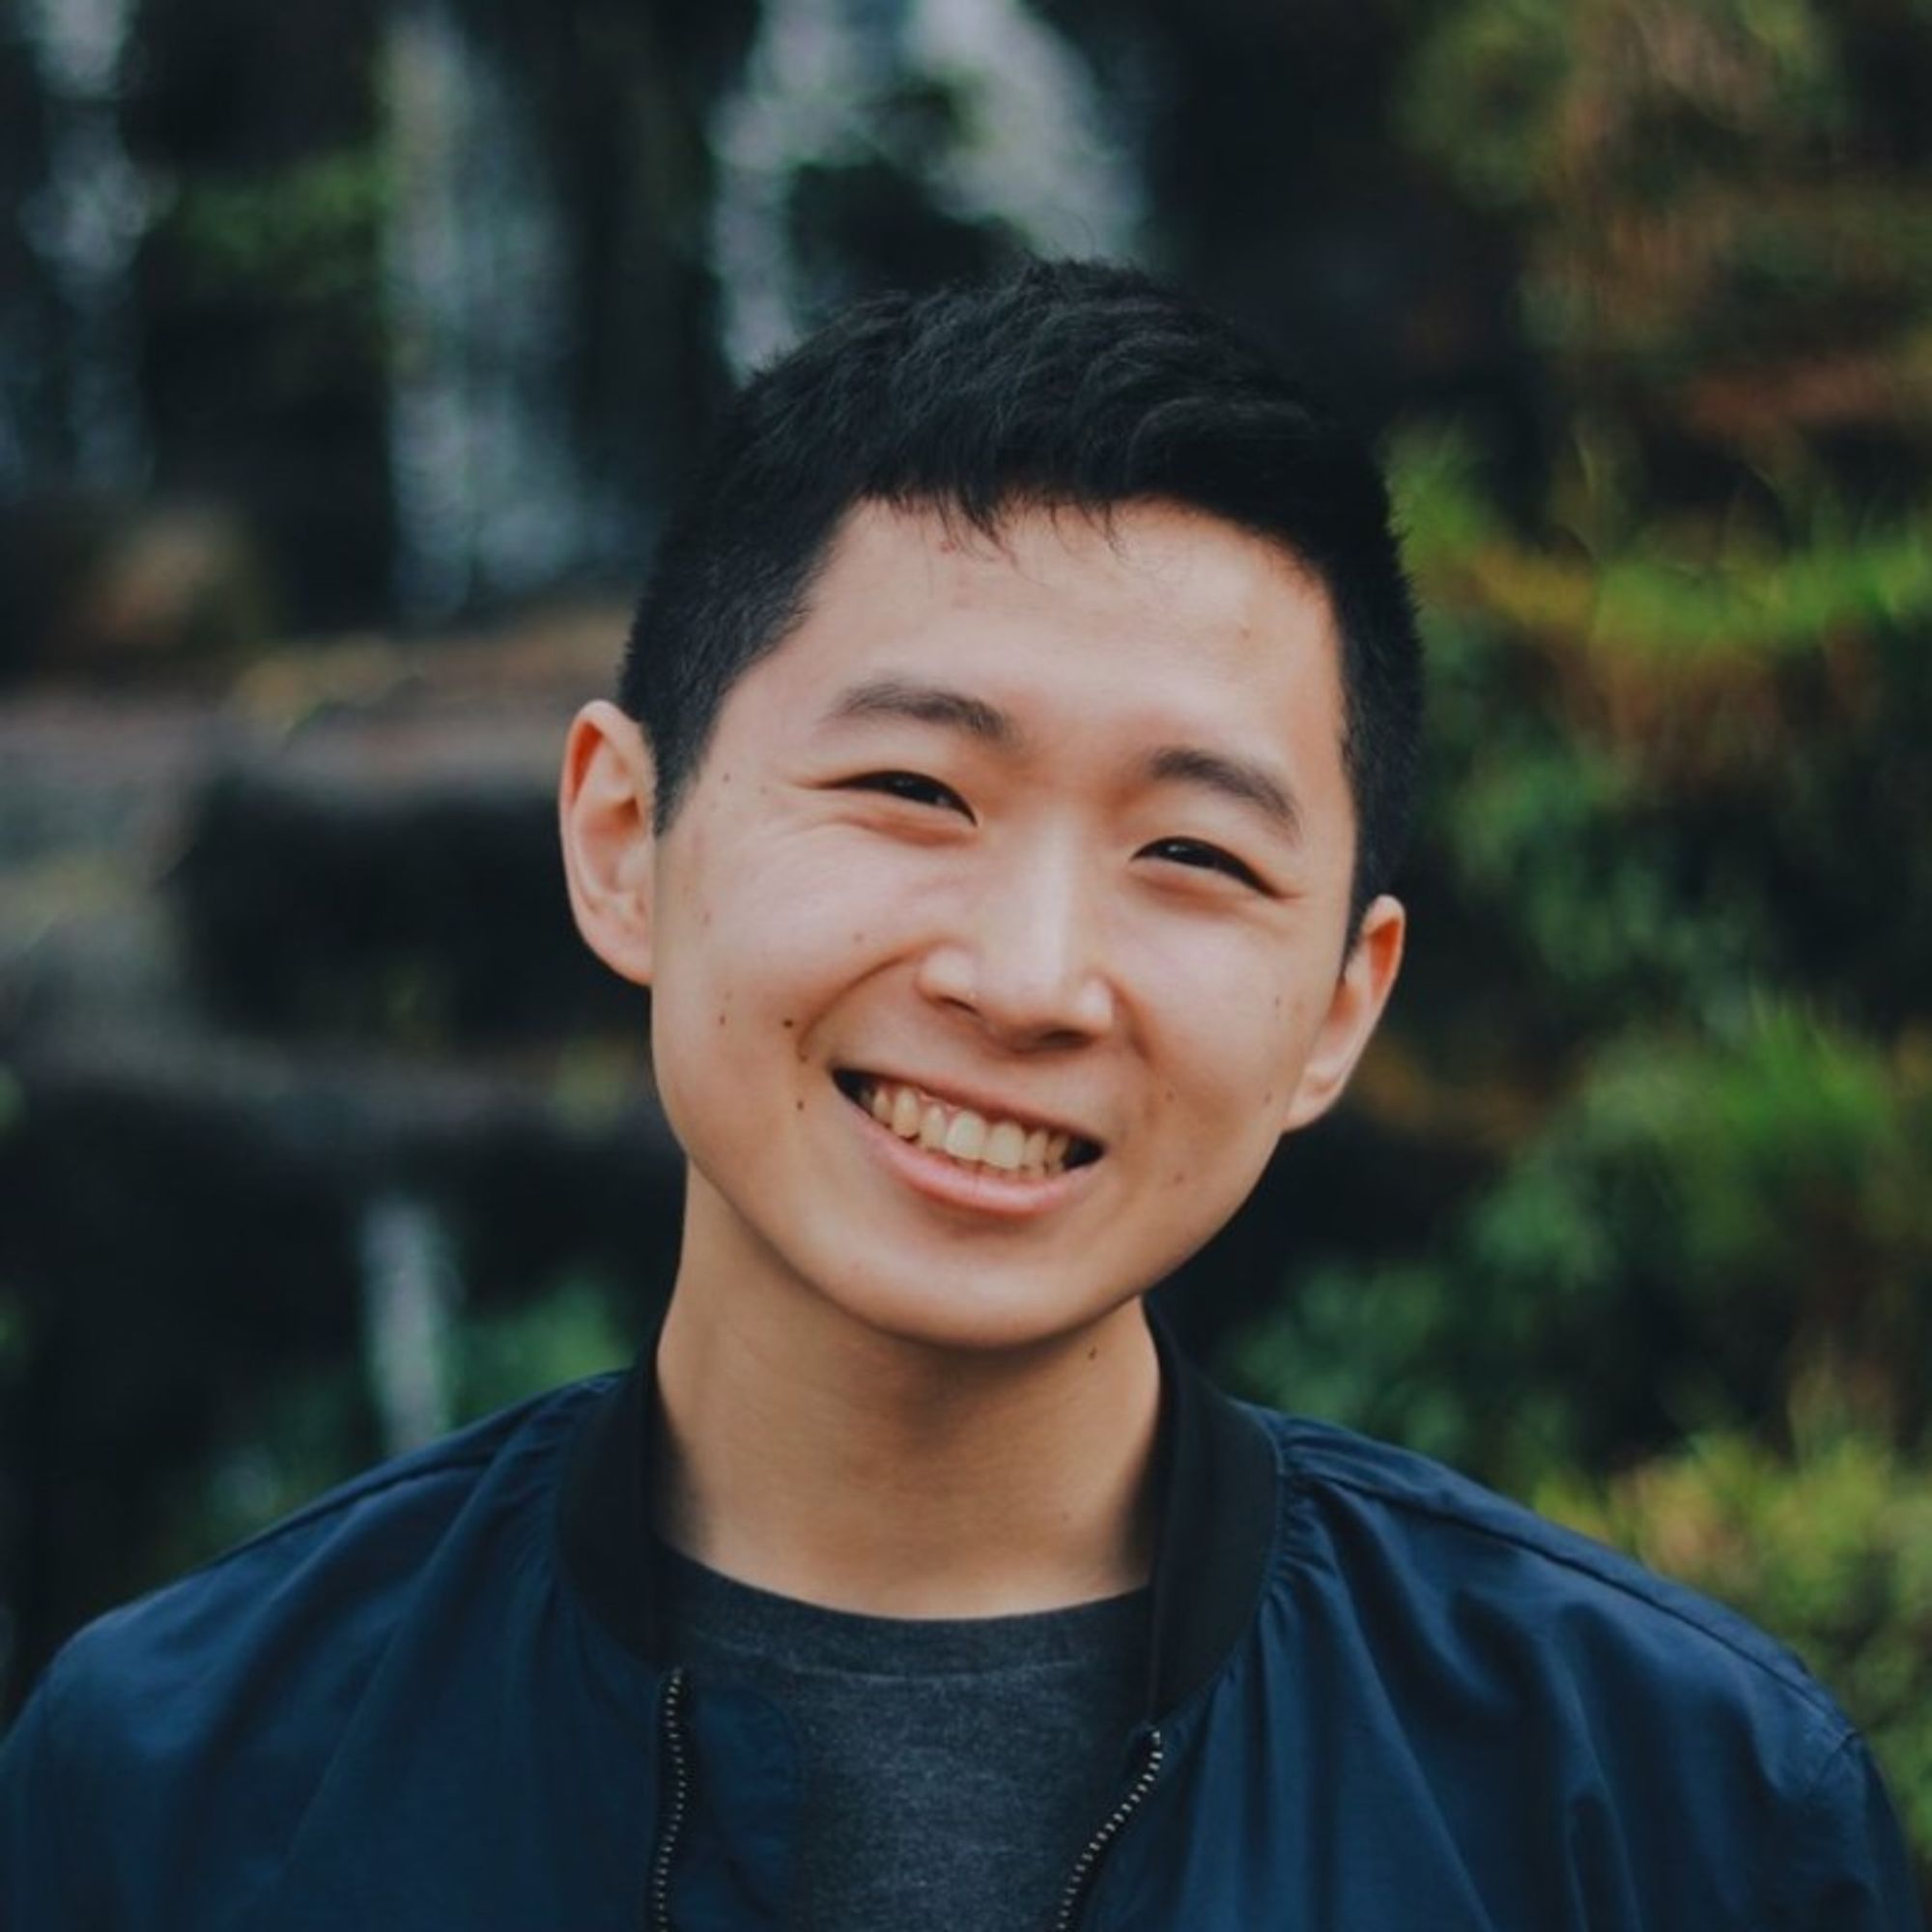 Raymond Yin
Software Engineer
Prior Sr. Engineer and Tech Lead @ Quora • Huge fan of Super Smash Bros. Melee